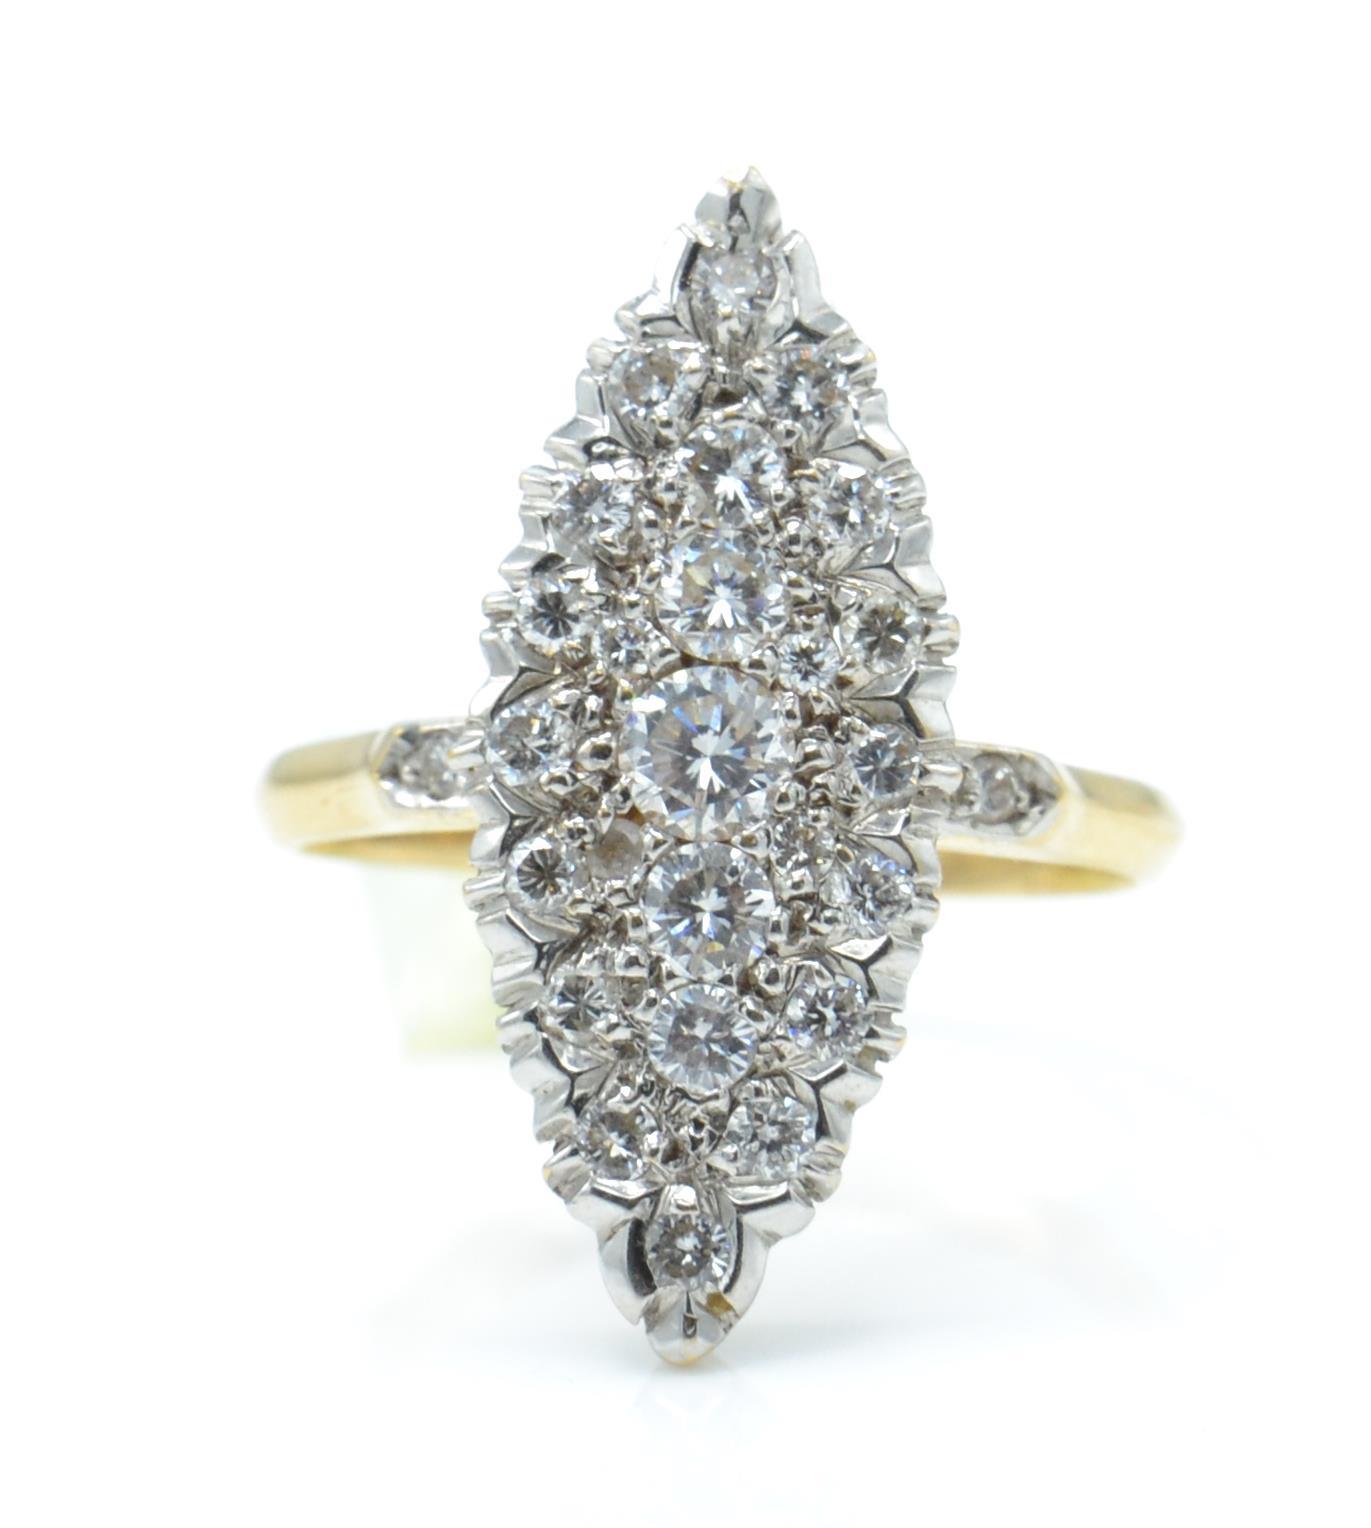 A French 18ct Gold & Diamond Ring